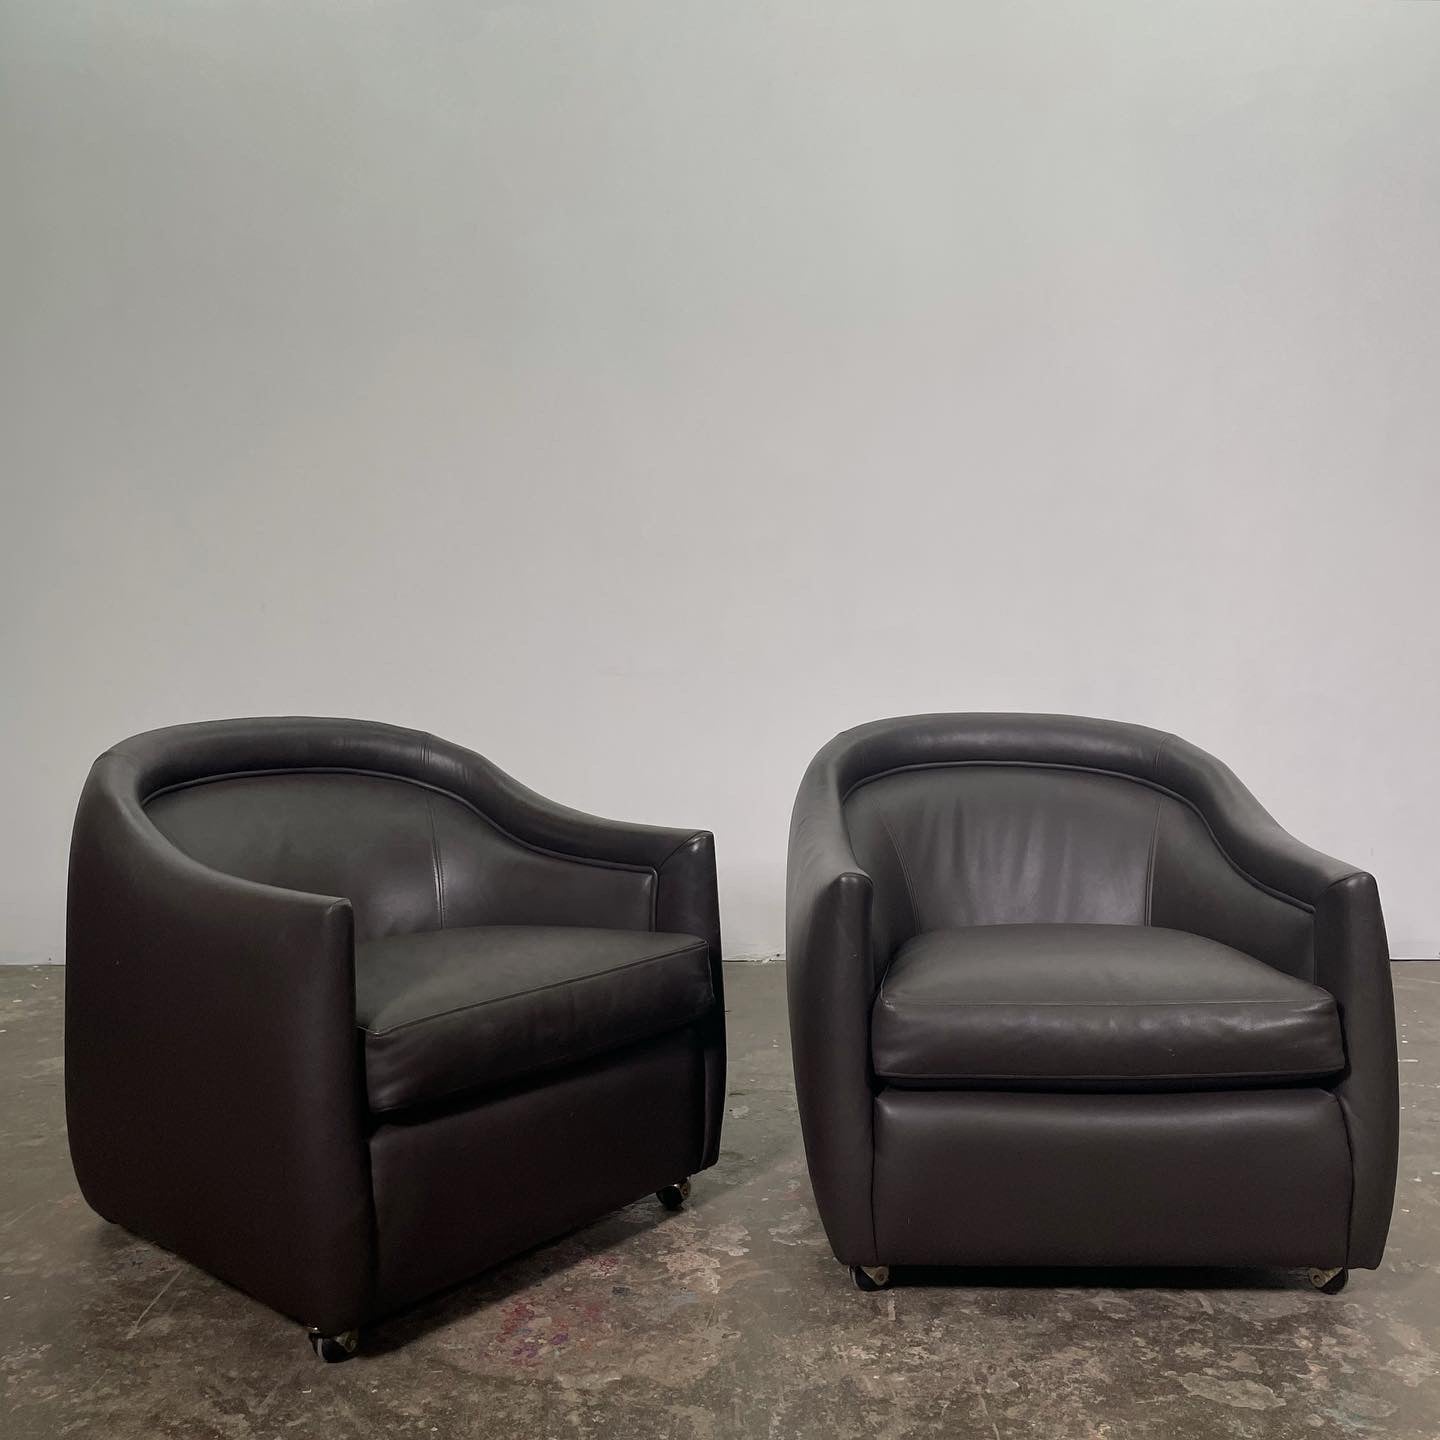 Pair of Italian Leather Club Chairs on Casters